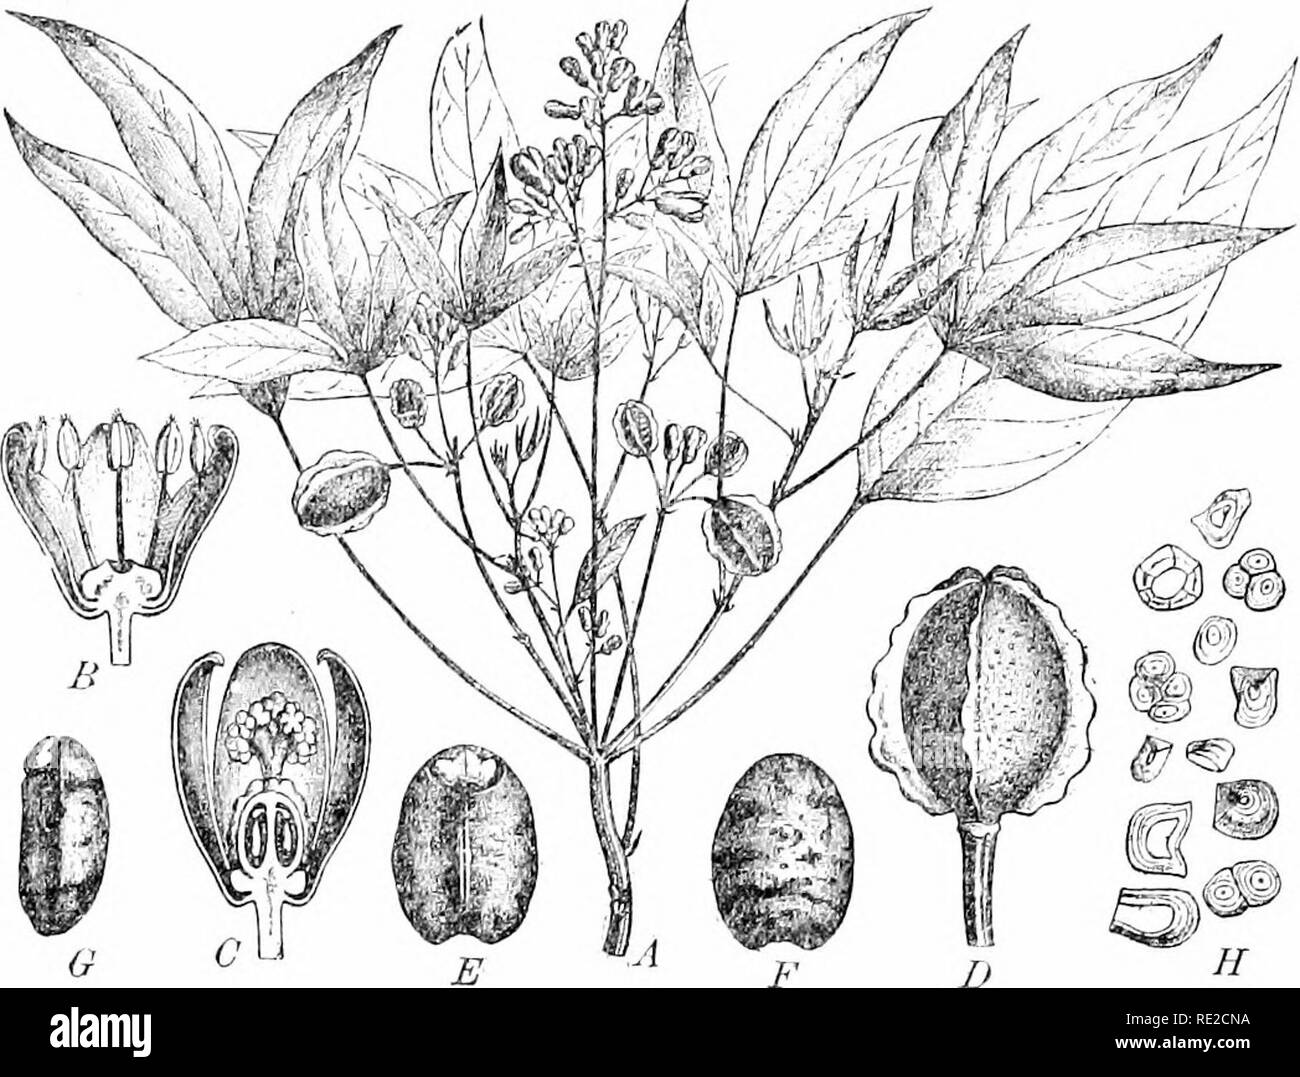 . Plants and their uses; an introduction to botany. Botany; Botany, Economic. MISCELLANEOUS FOOD-PRODUCTS 111. Fig. 117, II.—Bitter Cassava. A, flowering and fruiting branch. B, stam- inate flower, cut vertically. C, pistillate flower, cut vertically. D, fiiiit. E, F, G, seed, viewed from front, back, and side. H, starch grains from the root, much magnified. (Pax, Martins, and Tschirch.) informed, that mushrooms are as nourishing a food as meat. That this is an absurd exaggeration is seen from the fact that a pound of mushrooms contains less than one-sixth as much proteid as a pound of meat. F Stock Photo